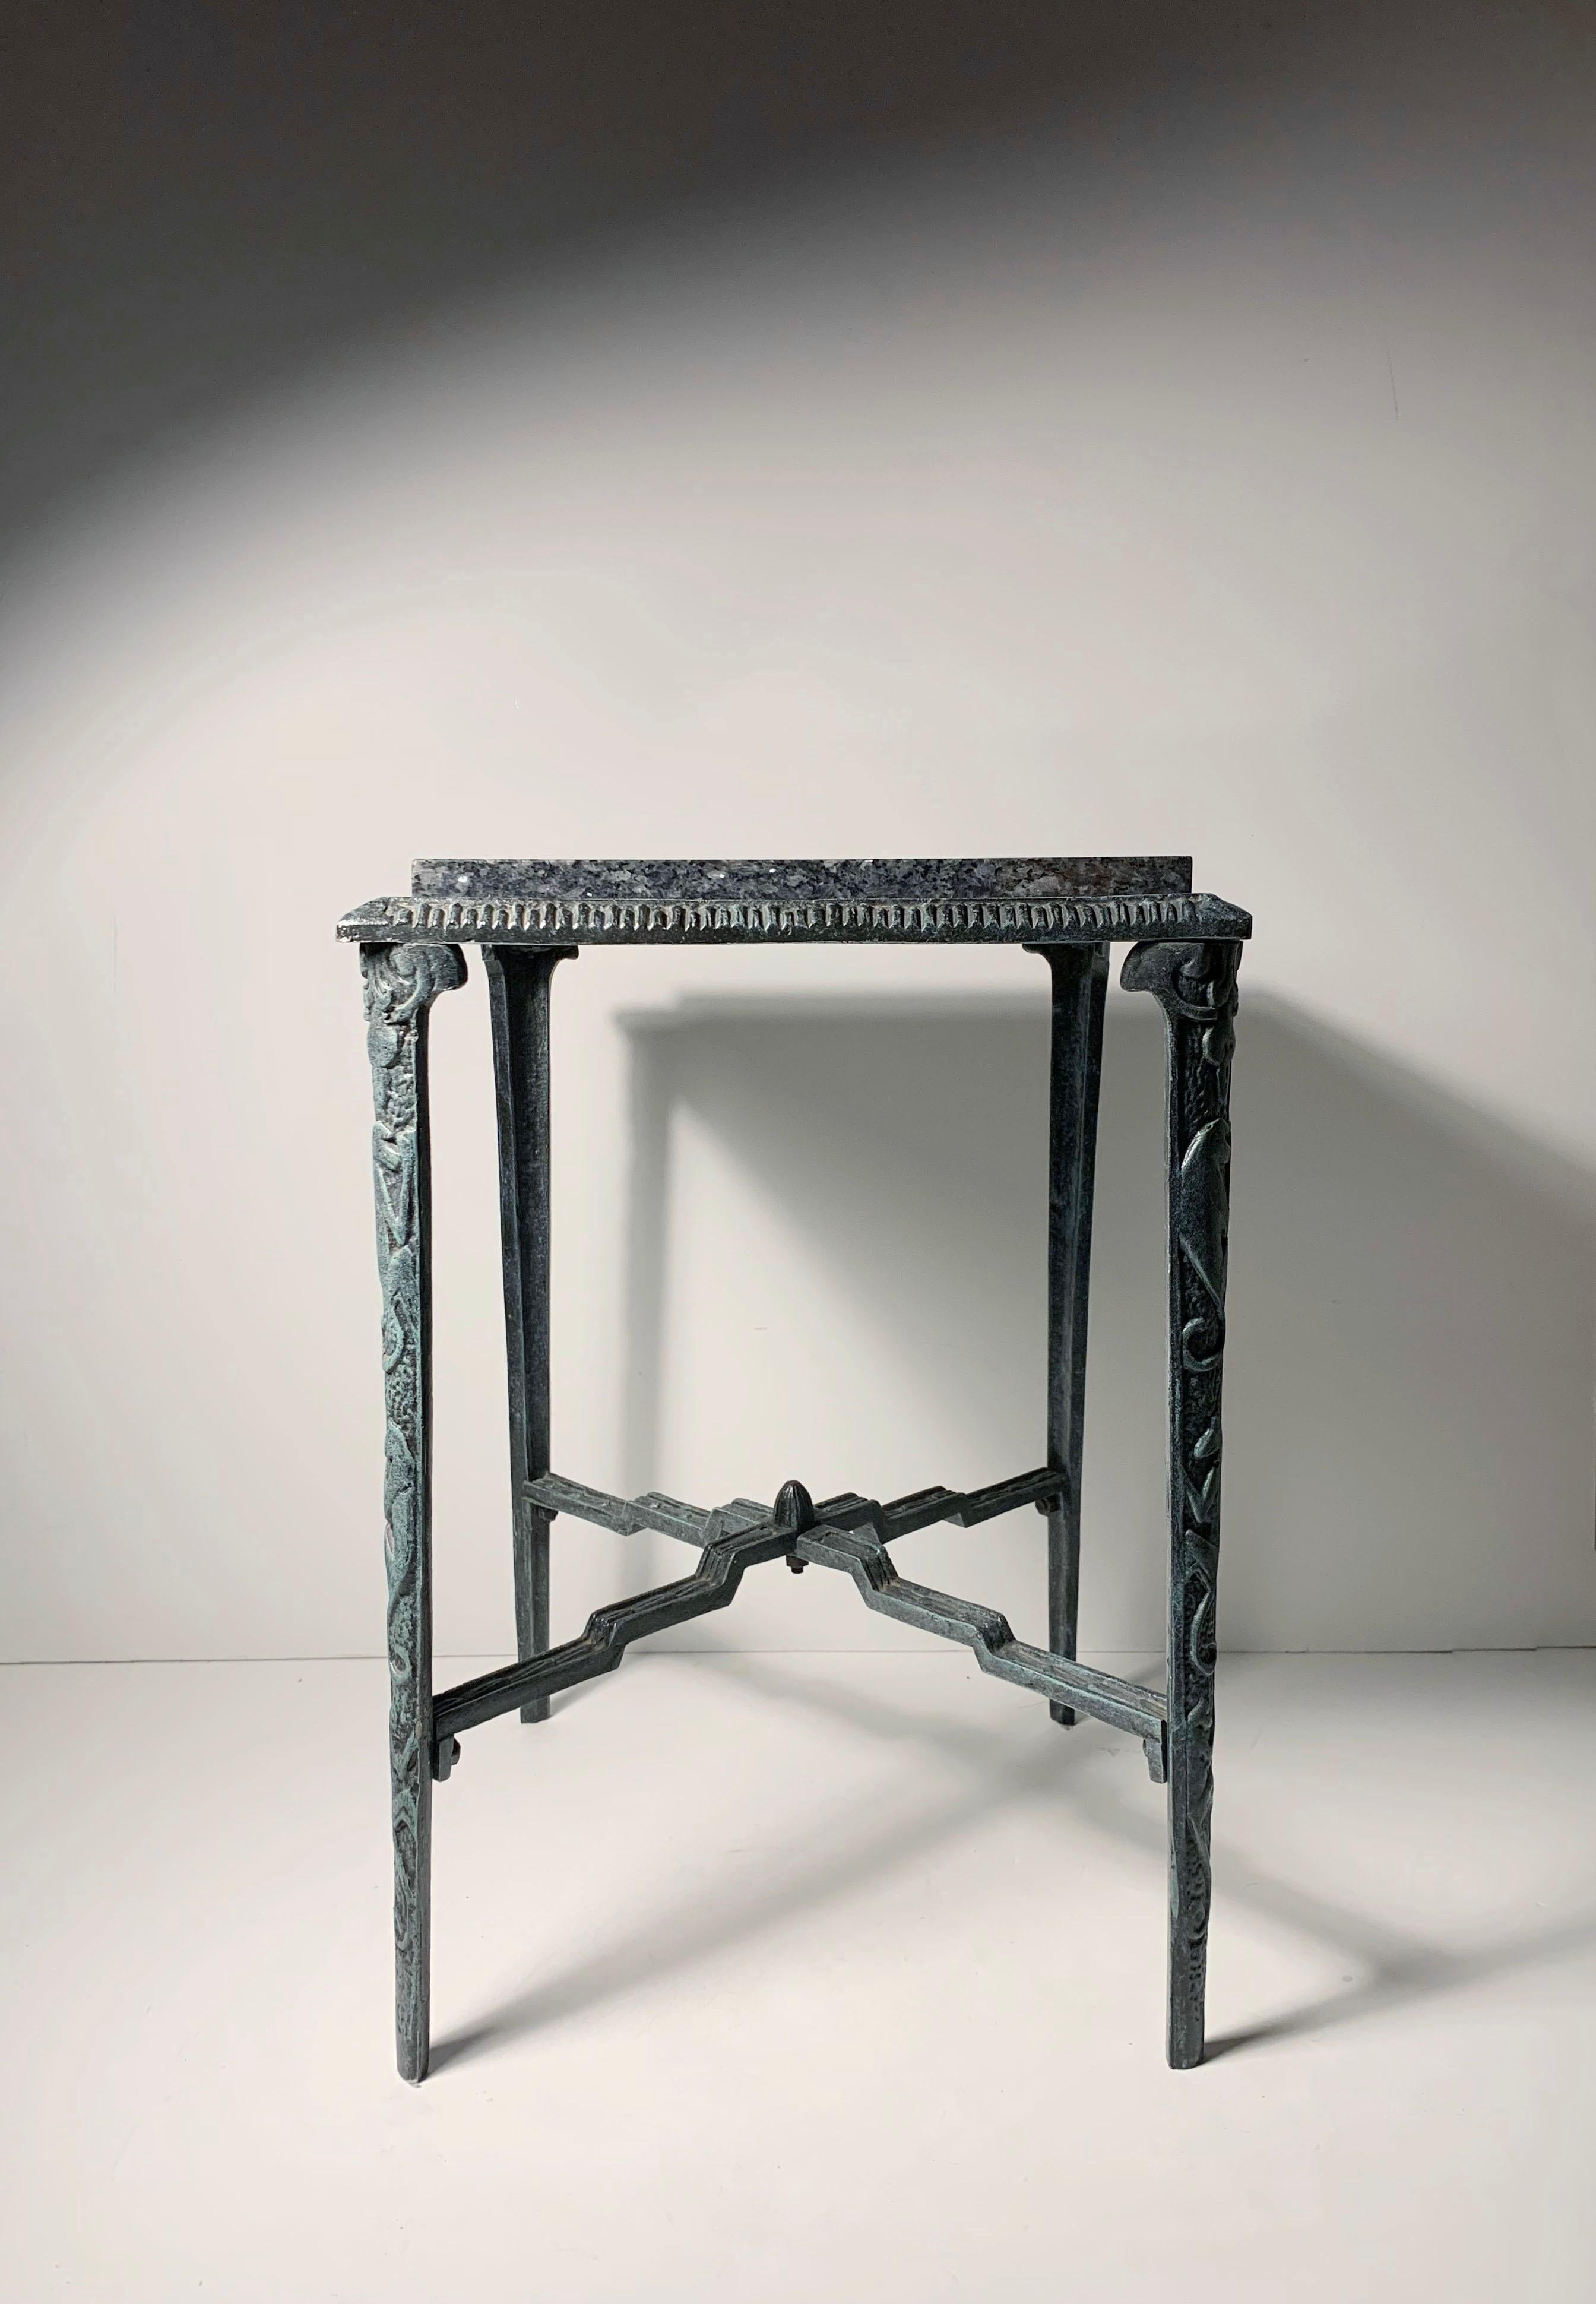 Originally made by Howell Furniture Company in the 1920's in cast iron. This example appears to be a later edition probably from the 1950s/60s in a cast Aluminum with a patina finish. The frame is lightweight and includes the marble that still